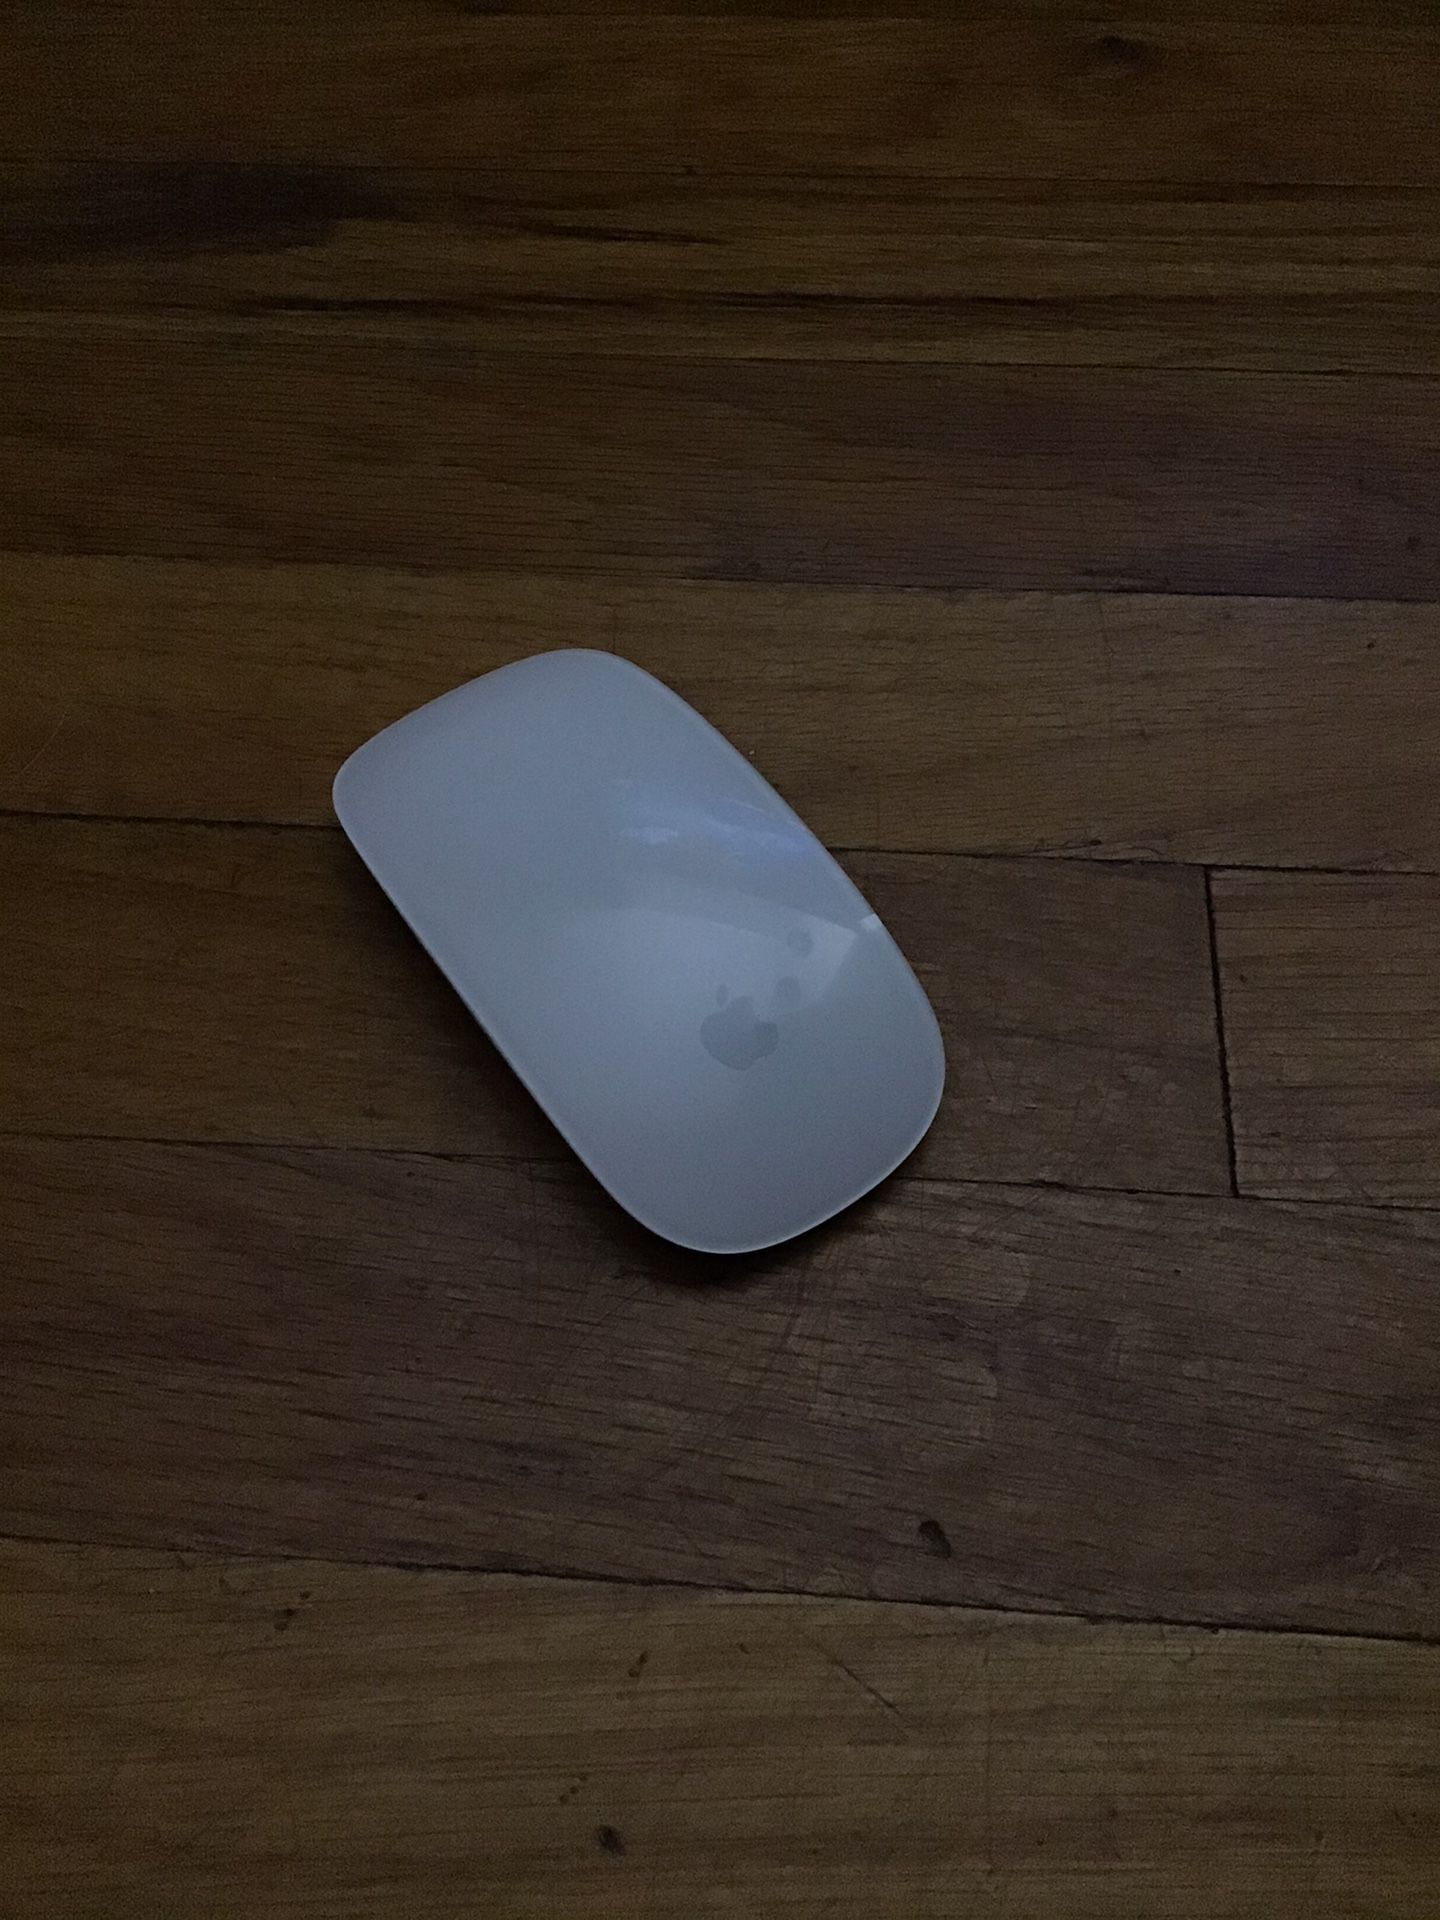 Apple Magic Bluetooth Wireless Laser Mouse - A1296 (Mouse Only, no box) Reg. price is $65